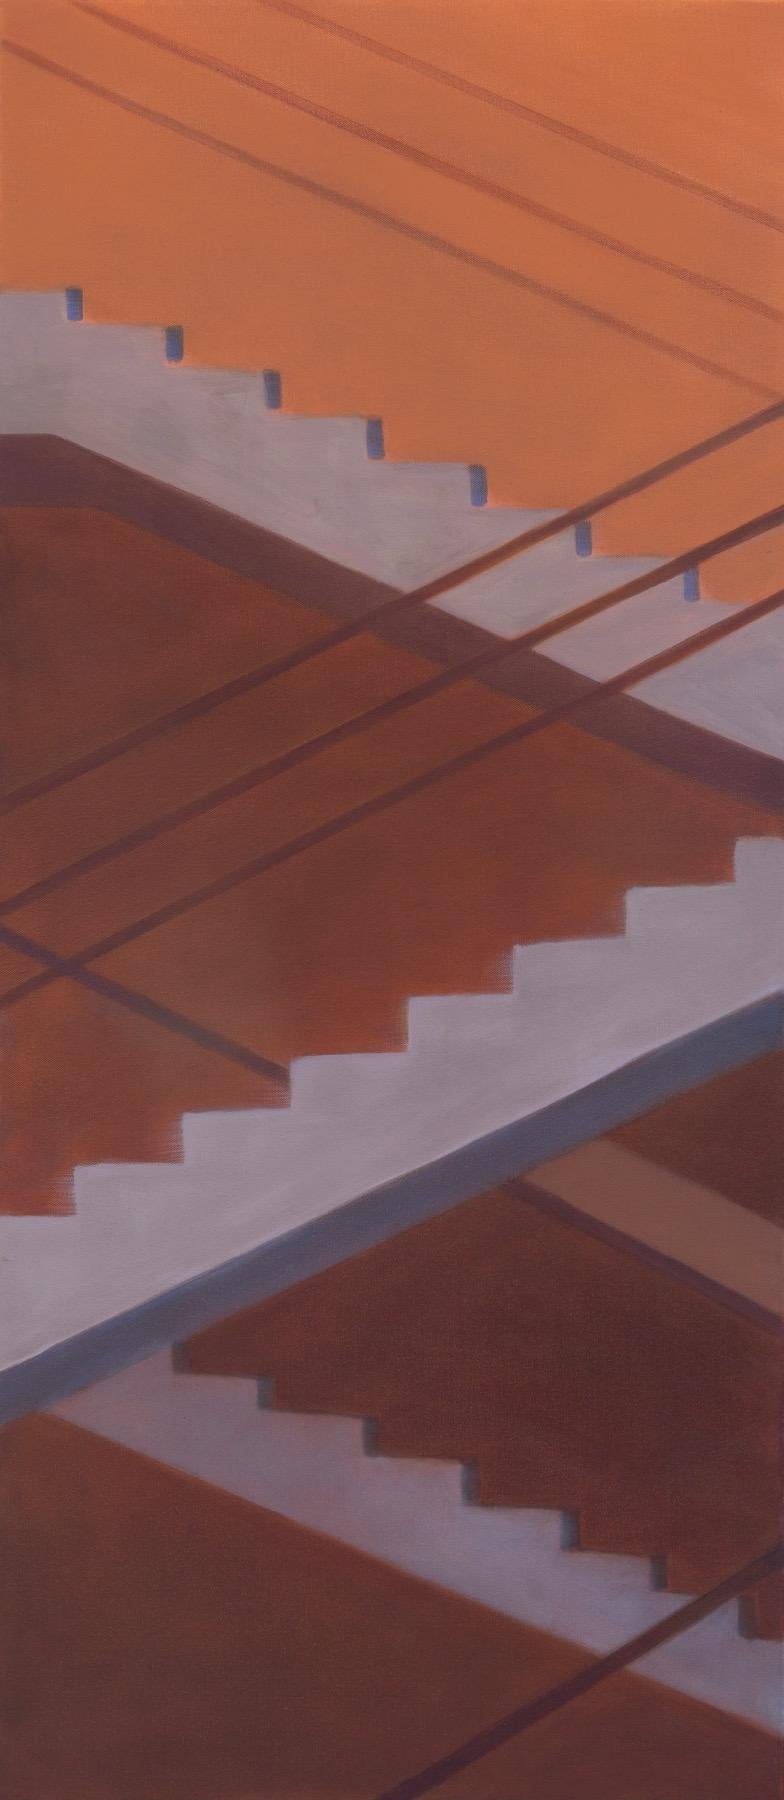 Anne Subercaseaux Abstract Painting - Ascendance - vertical staircase oil on canvas